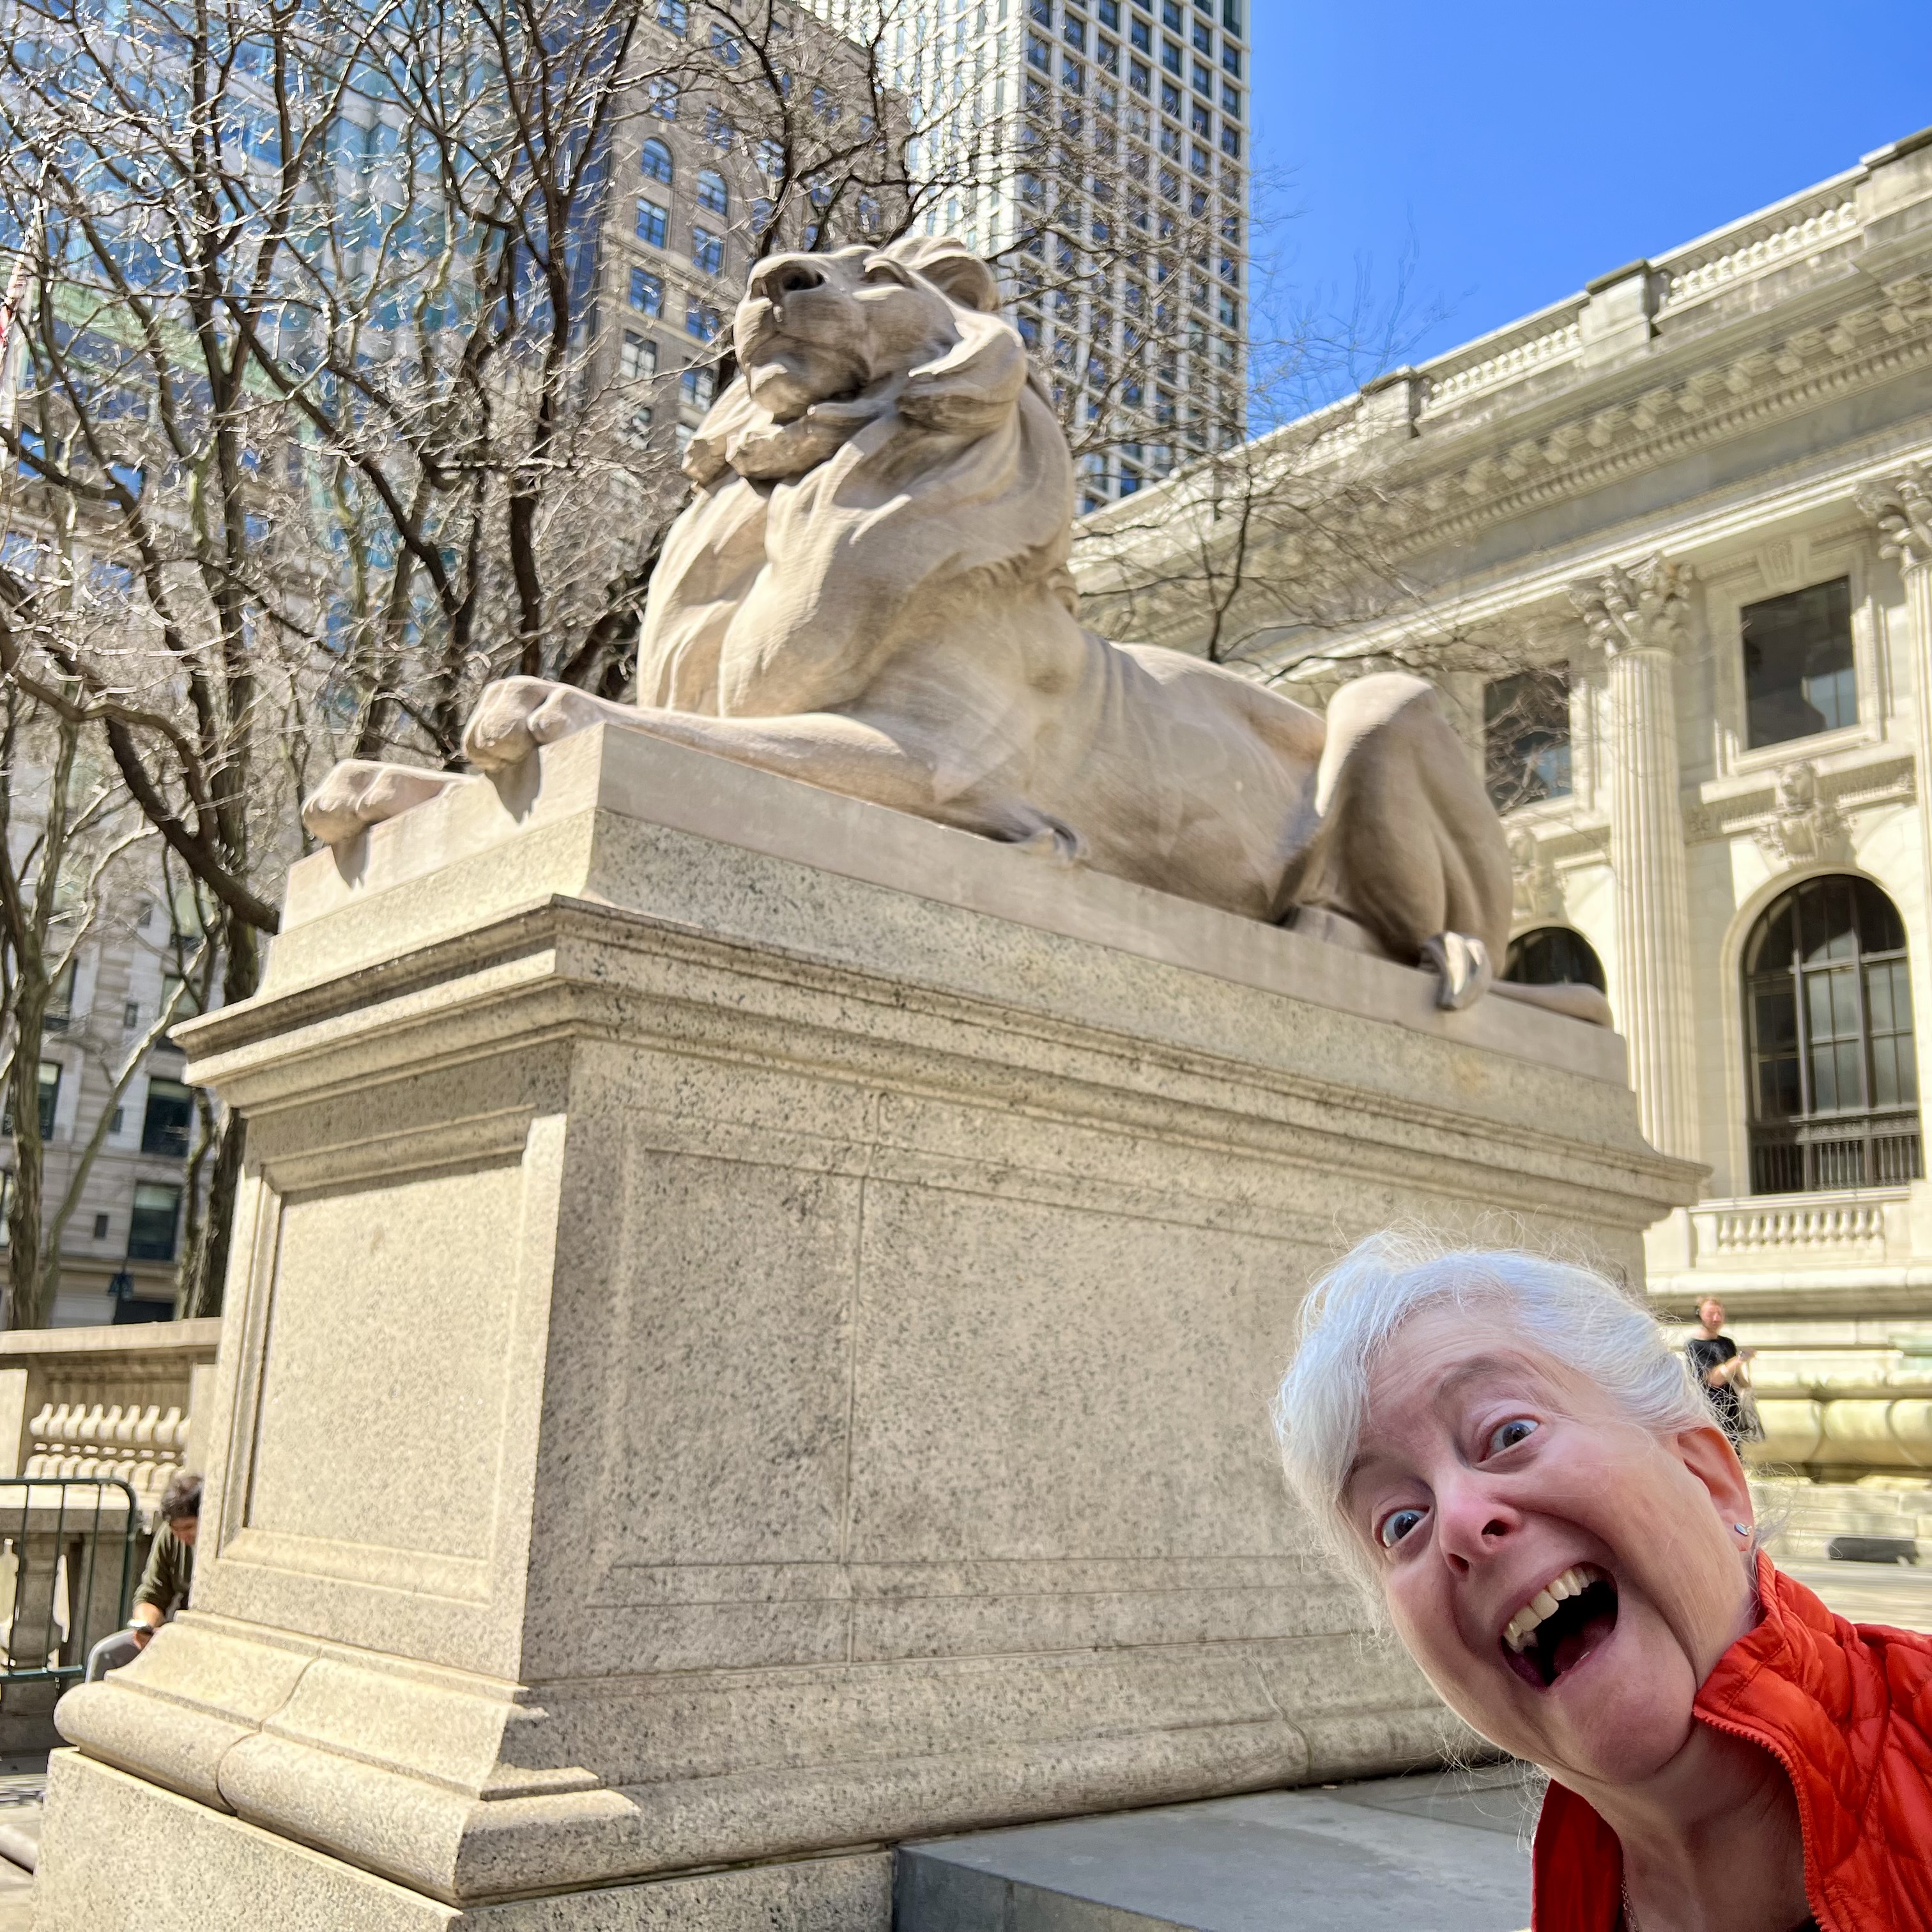 a woman taking a selfie with a lion statue in front of a building